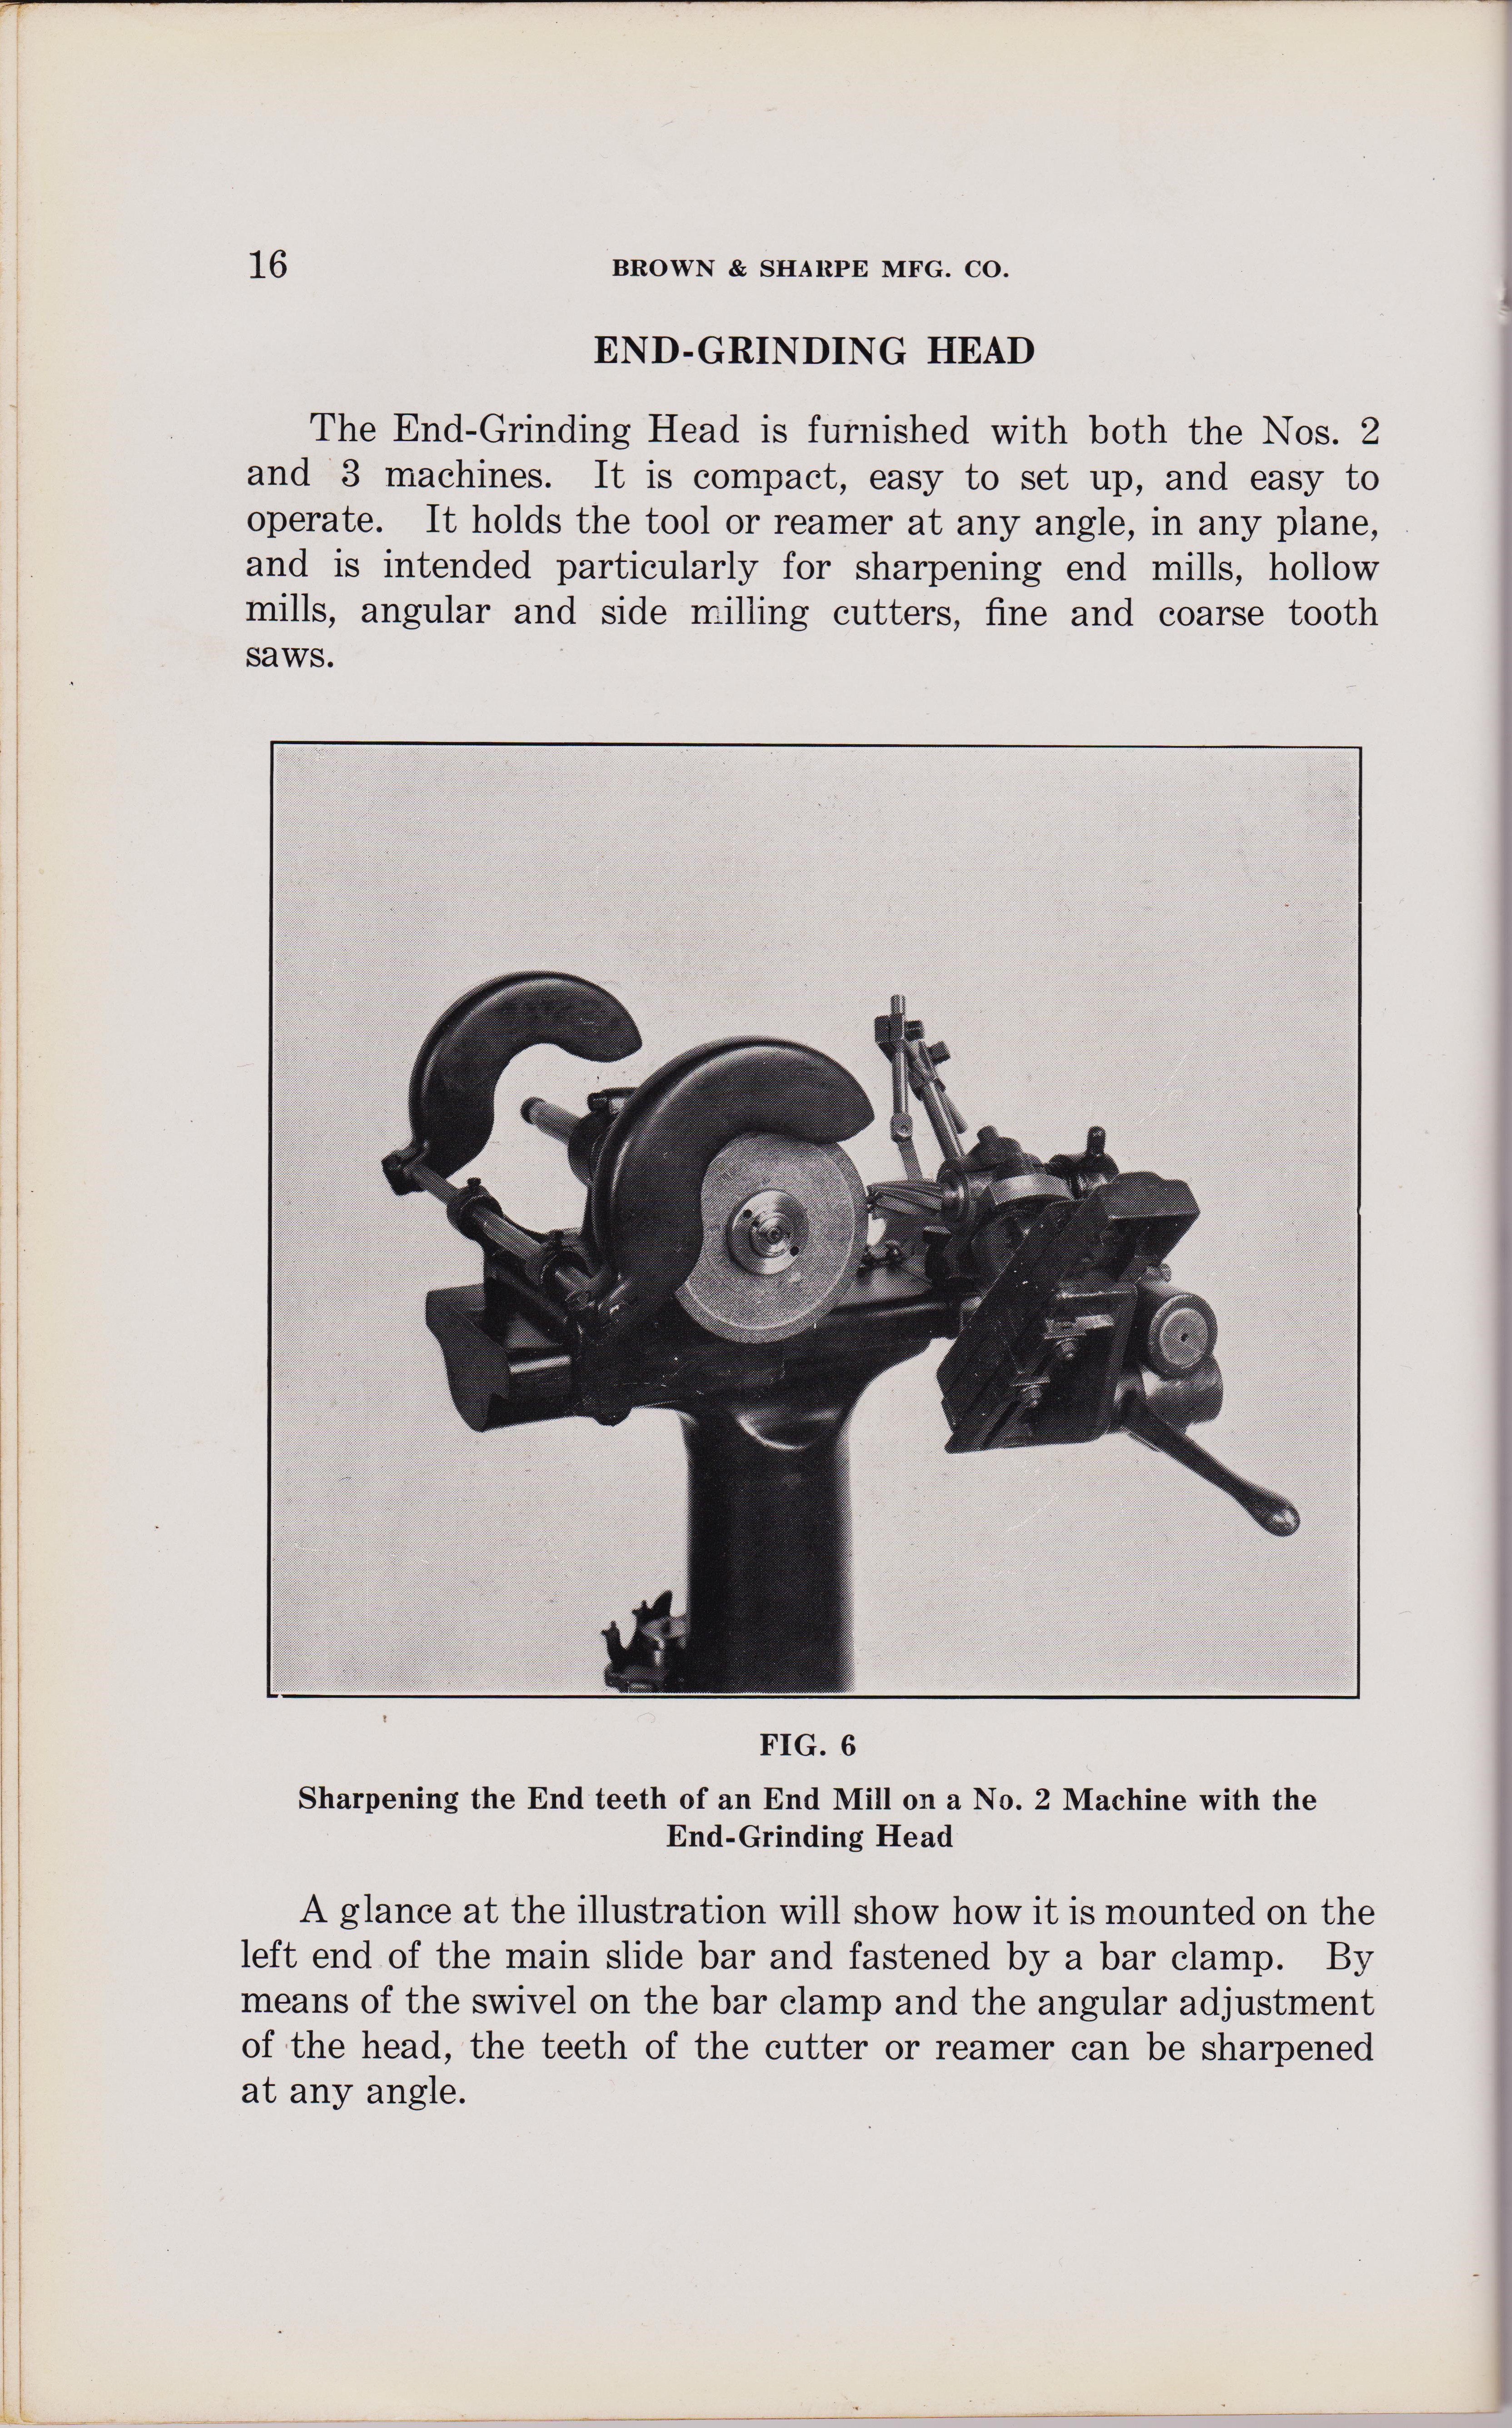 https://antiquemachinery.com/images-2020/Universal-Cutter-and-Reamer-Grinder-Machine-Brown-and-Sharpe-Mfg-Co-1929-No2-No3-pg-16.jpeg